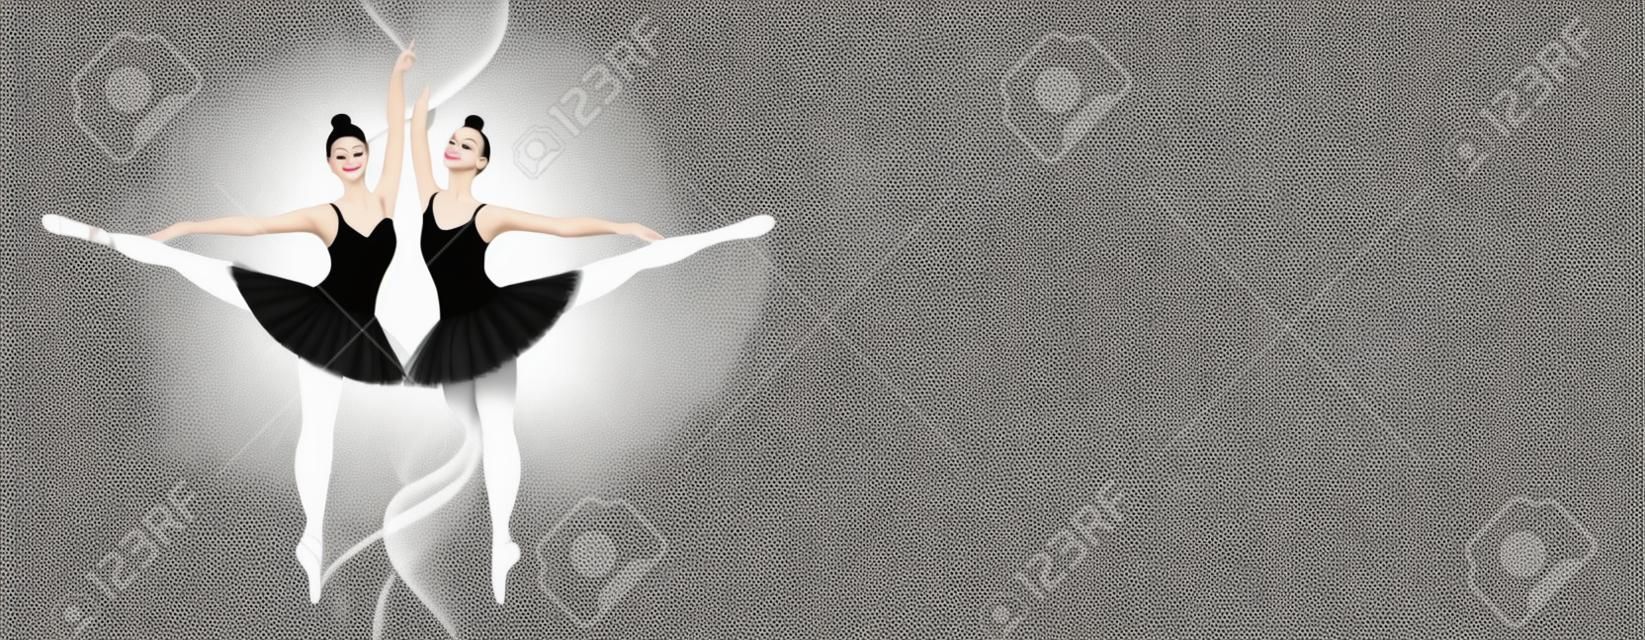 Dance girls in tutu on pointes on white and black background. Ballerina white and black swan. Ballet banner for dance school, courses, shows. Vector graphics with copy space.